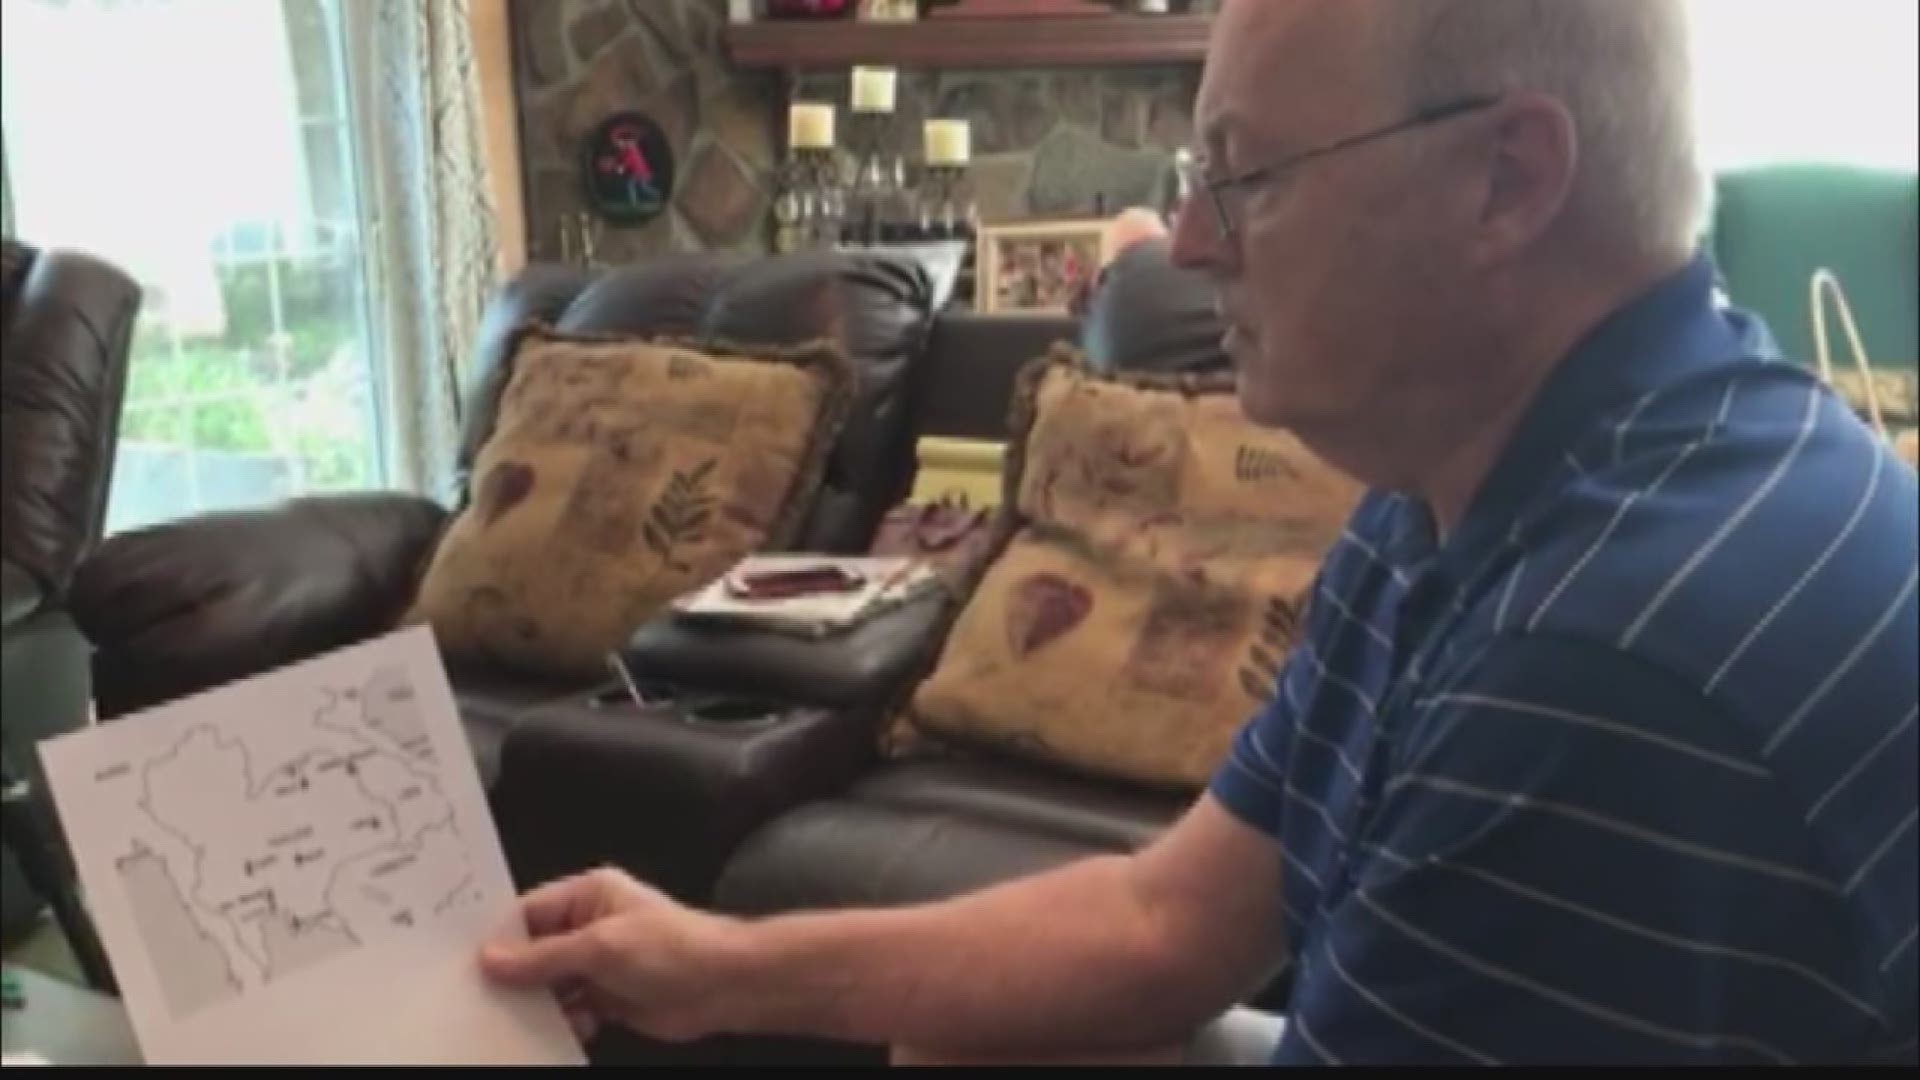 Vietnam-era war veterans from all over the United States started "Operation Orange Envelope" to get Congress' attention. They want the Department of Veterans Affairs to recognize service members stationed in Thailand were exposed to the toxic chemicals in "Agent Orange." Sarah Hammond spoke to one vet in Warner Robins who says he sent more than 500 orange envelopes to D.C.